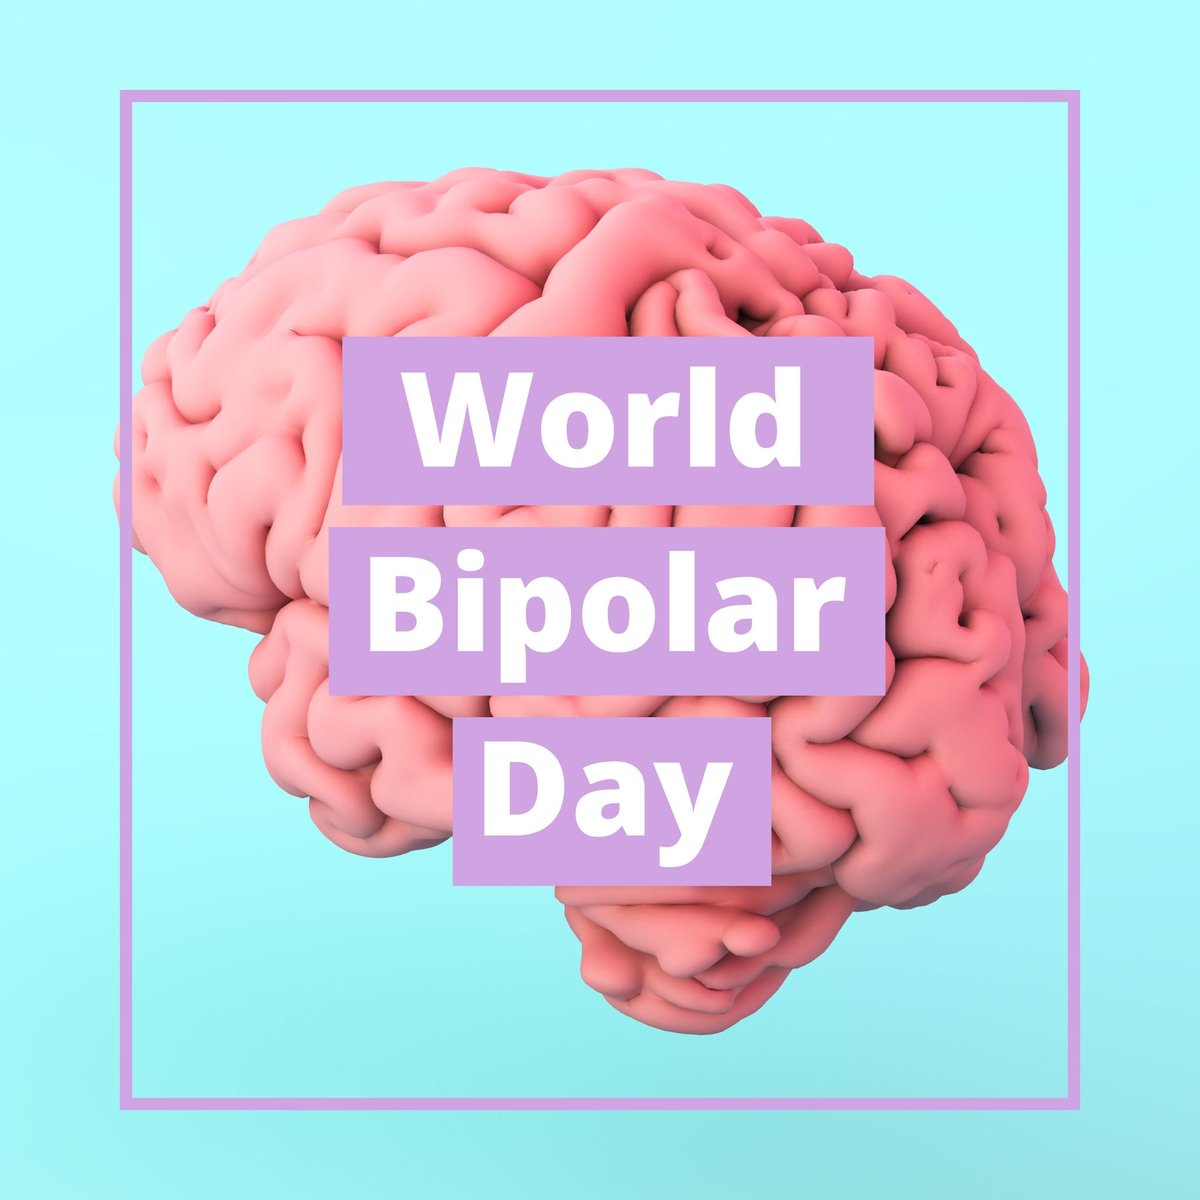 Bipolar disease is a disease of #brain and is treatable with psychotropic medicines and therapy @JhunuDr 

#WorldBipolarDay #BipolarTogether @UniofOxford